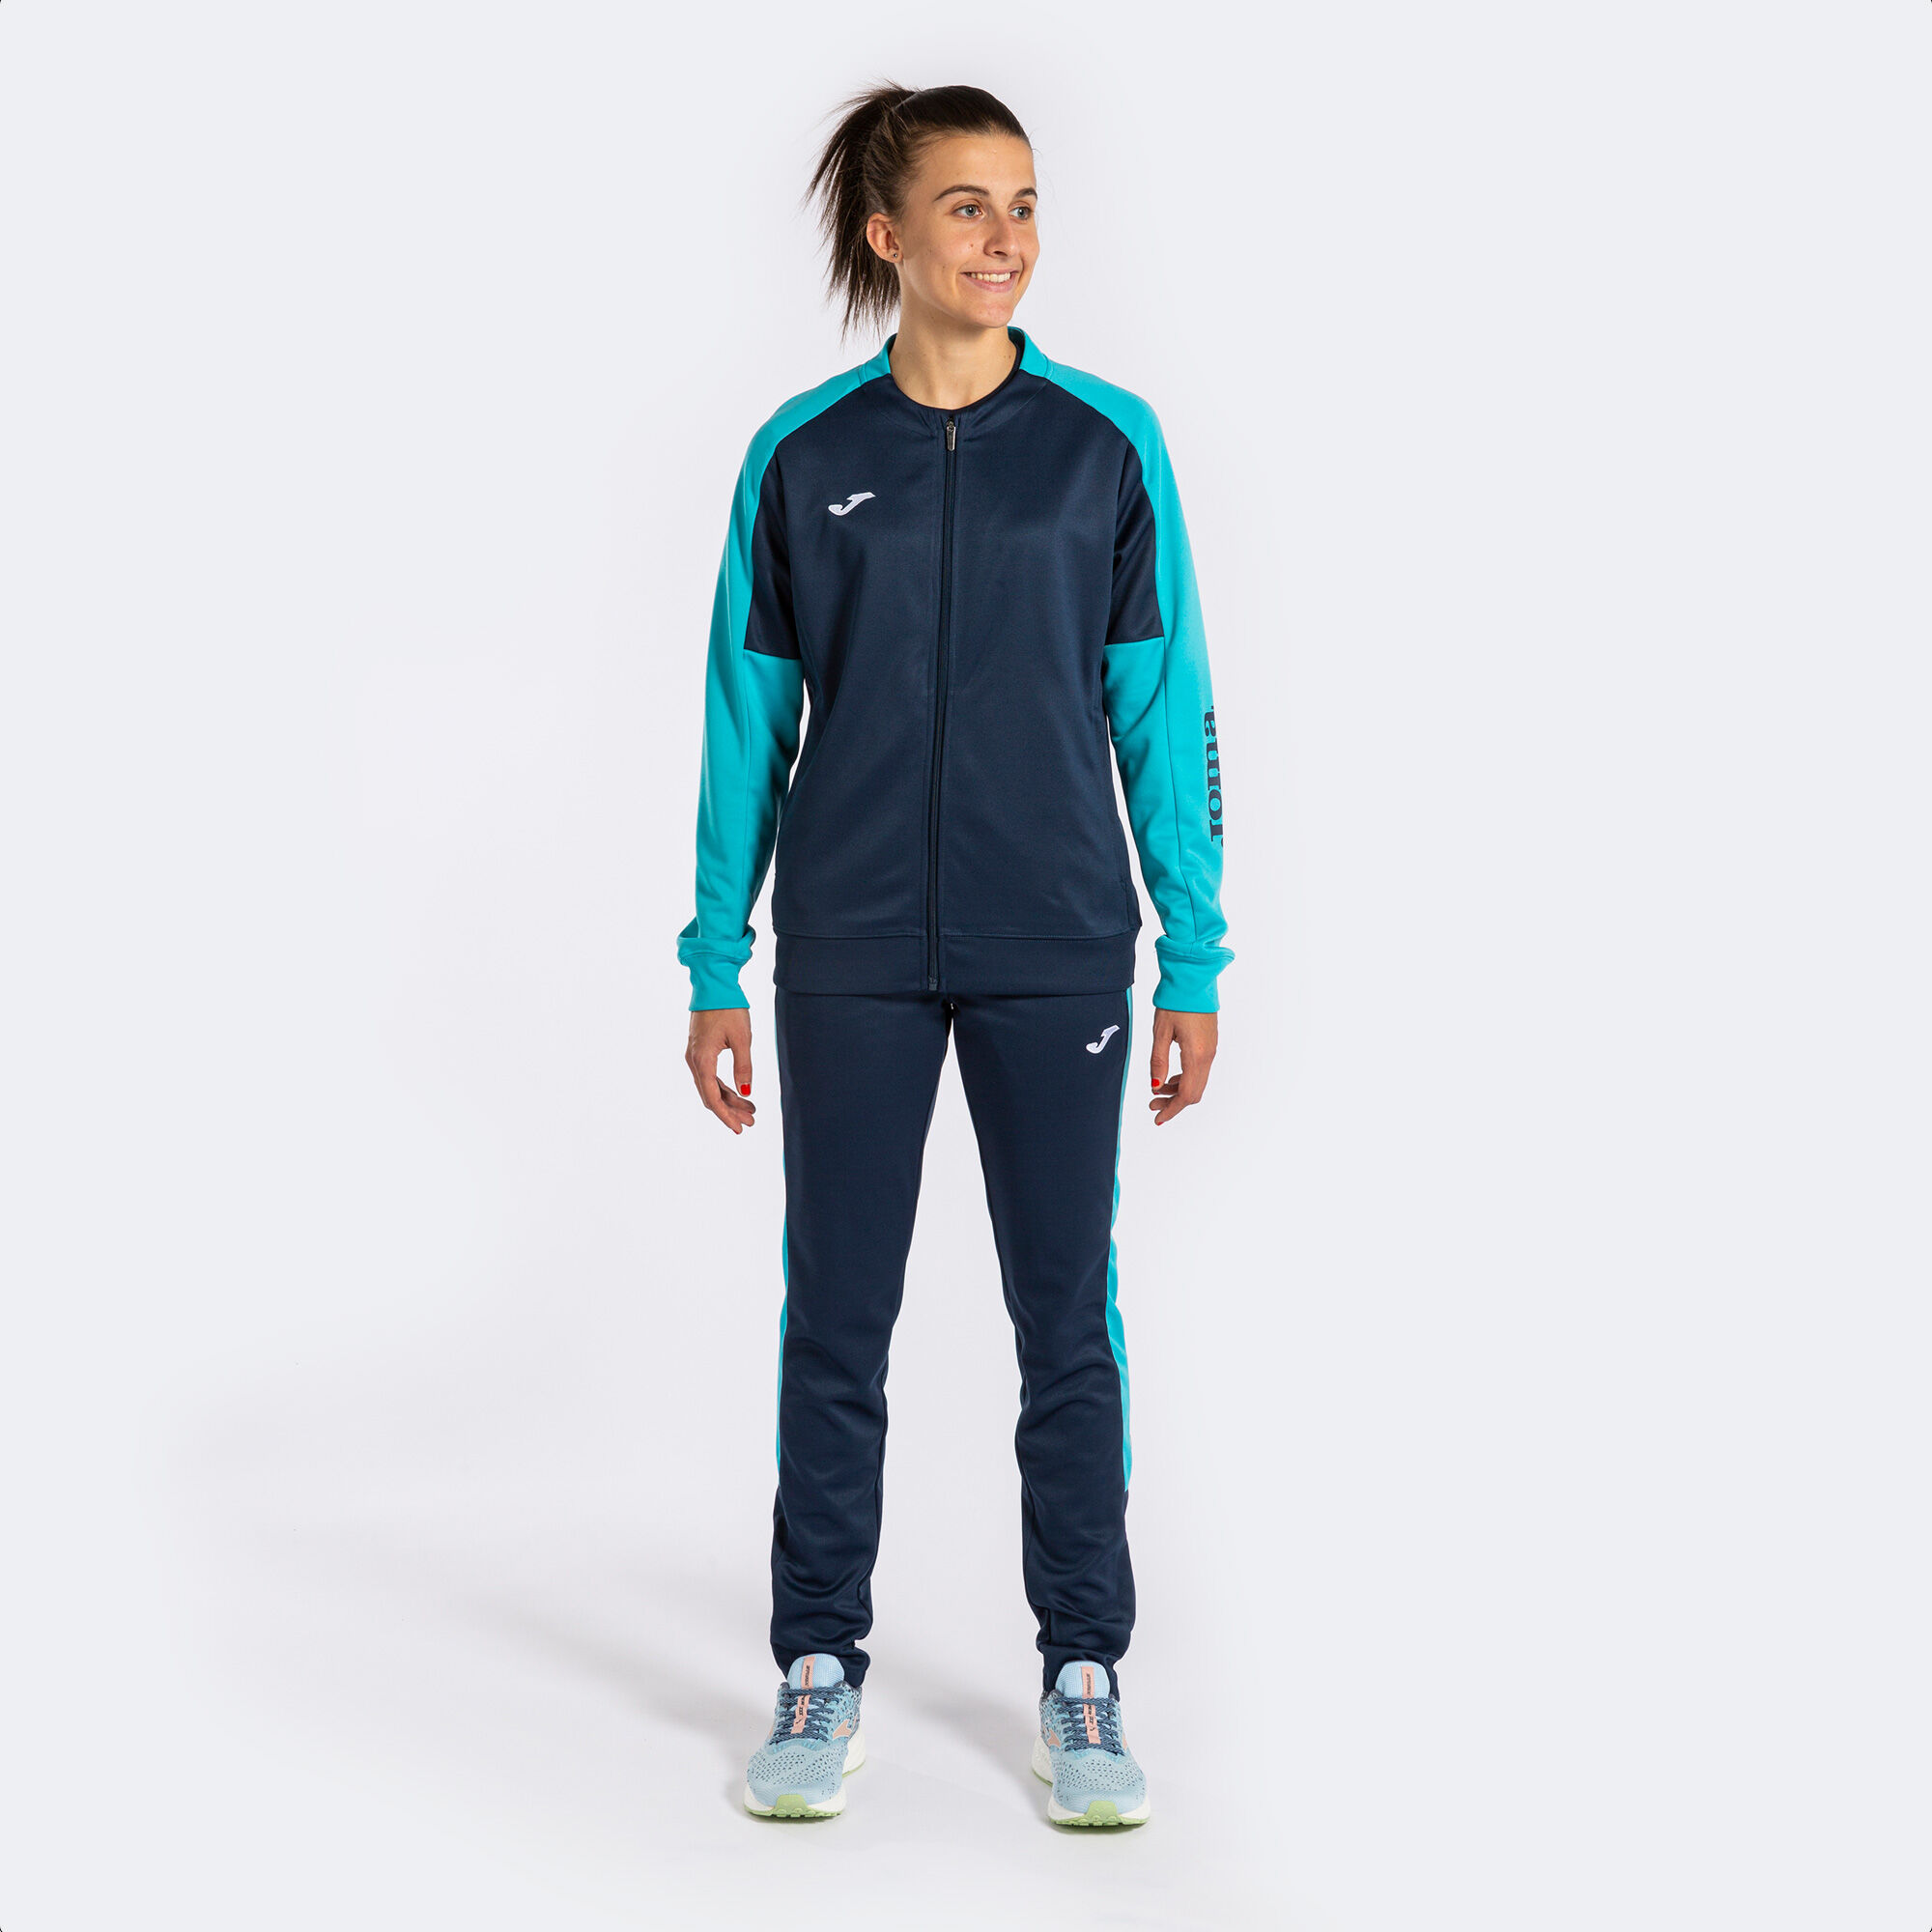 TRACKSUIT WOMAN ECO CHAMPIONSHIP NAVY BLUE FLUORESCENT TURQUOISE